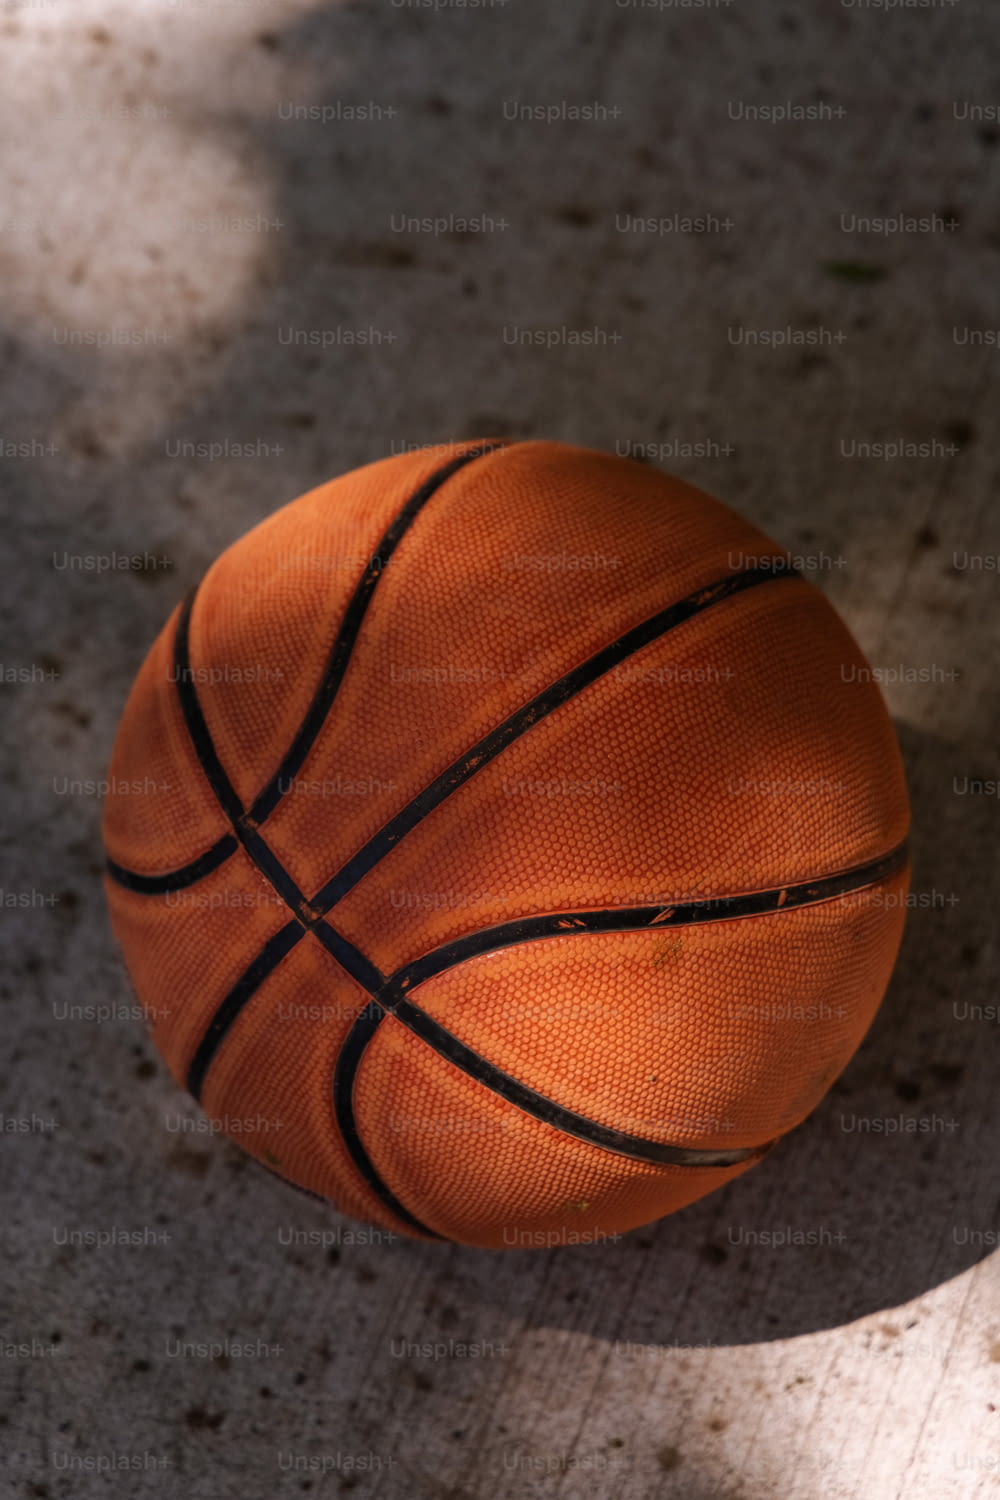 a basketball sitting on the ground in the shade